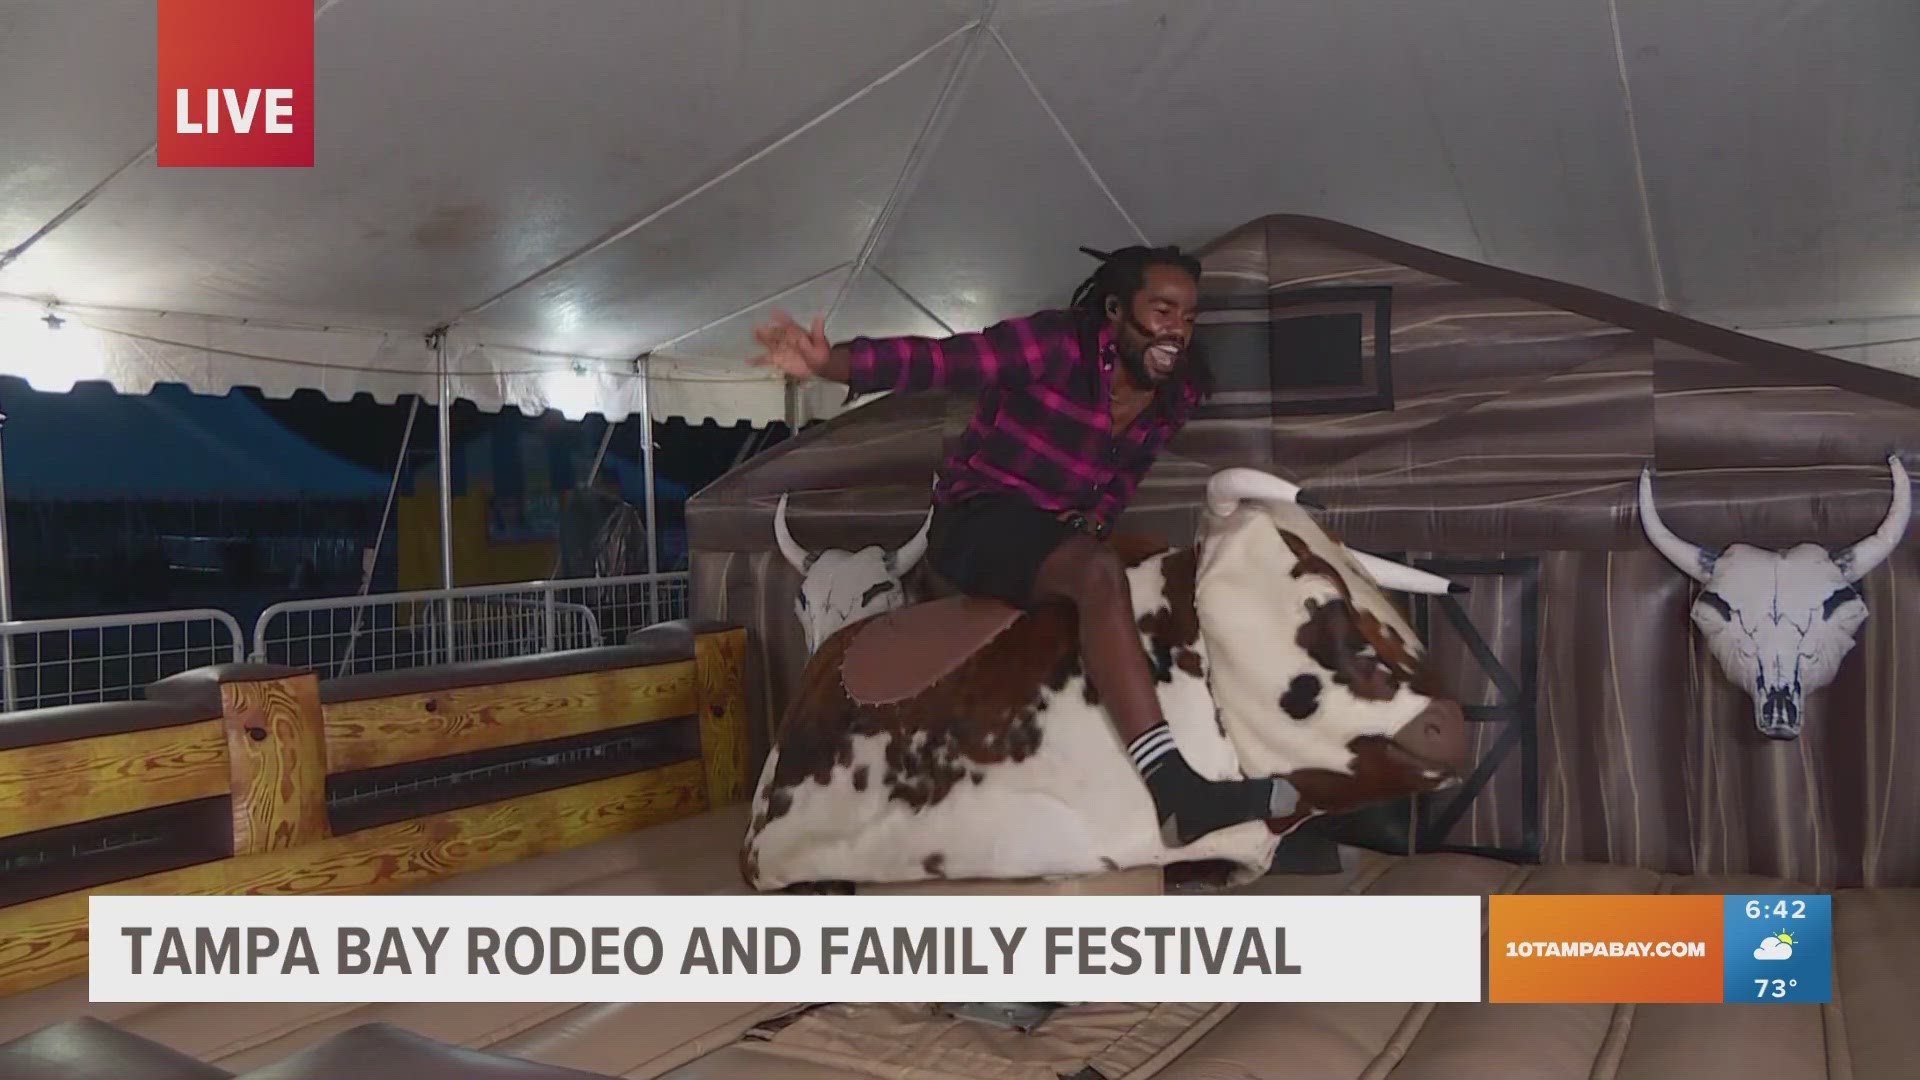 The Tampa Bay Rodeo and Family Festival kicks off Friday afternoon through Sunday.